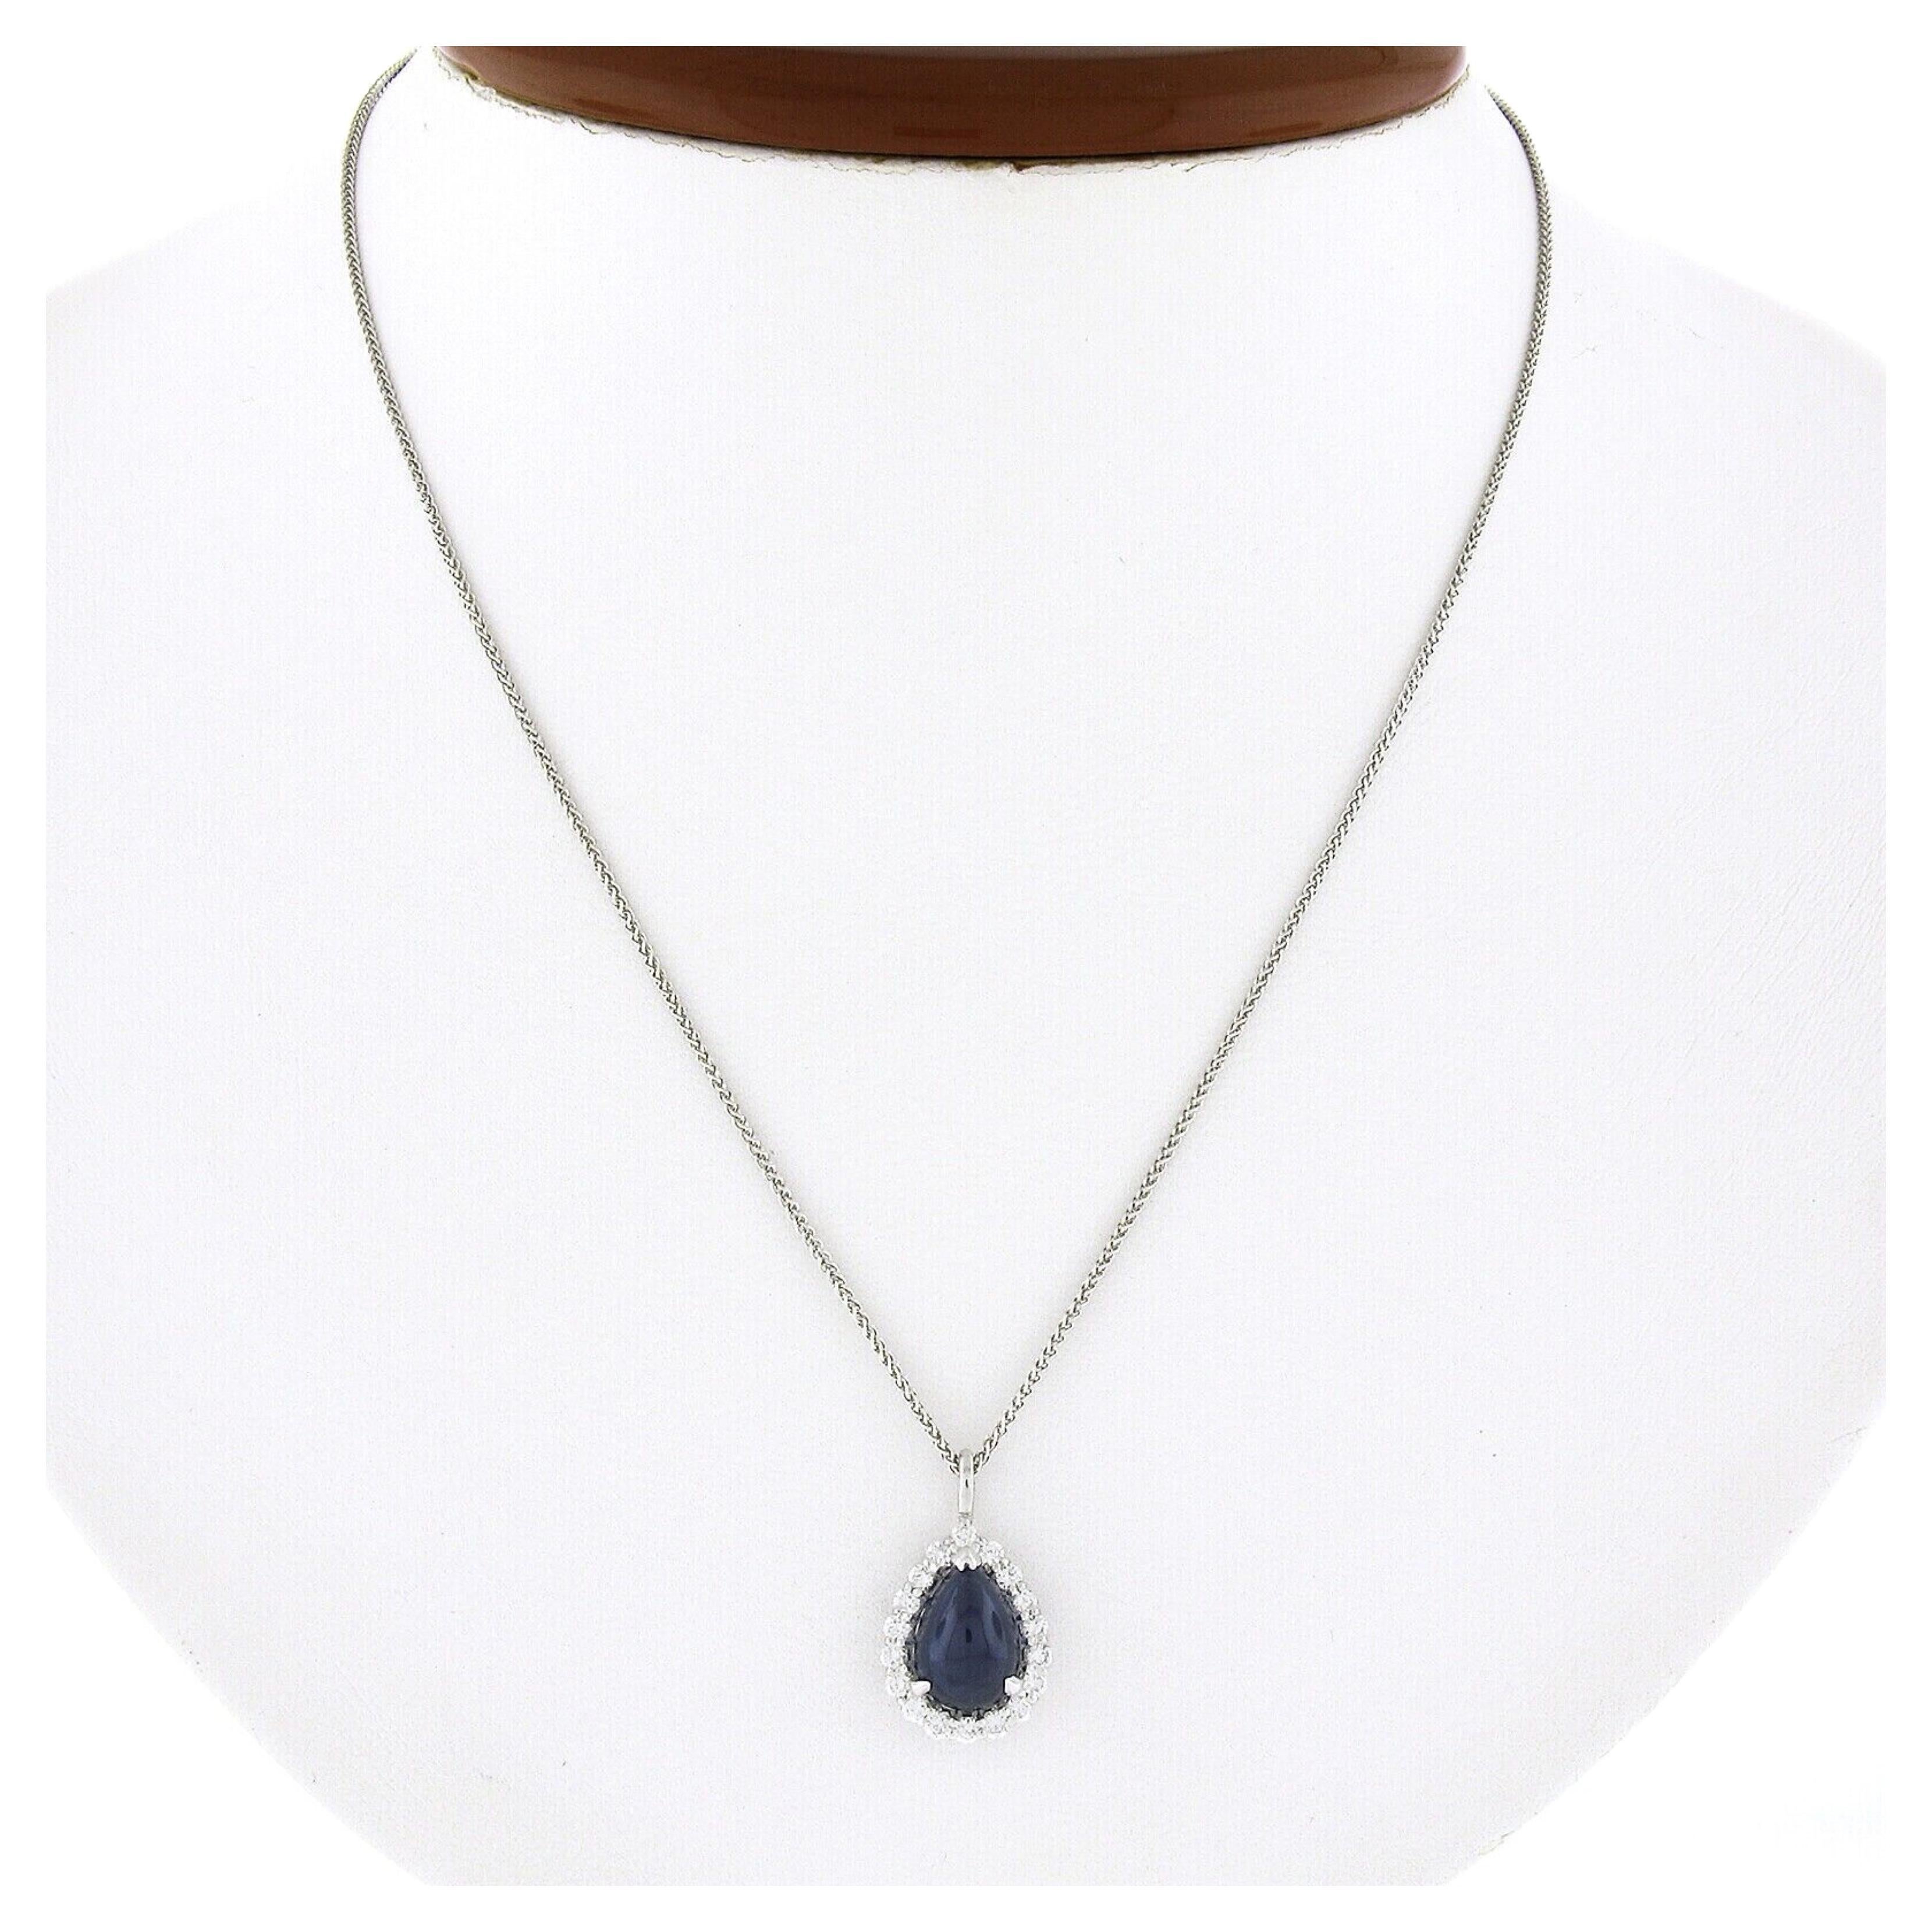 Here we have a gorgeous sapphire and diamond teardrop pendant necklace that is newly crafted in solid 14k white gold. The fine quality sapphire solitaire is Gubelin certified with a pear cabochon cut, displaying the most attractive, and truly rich,